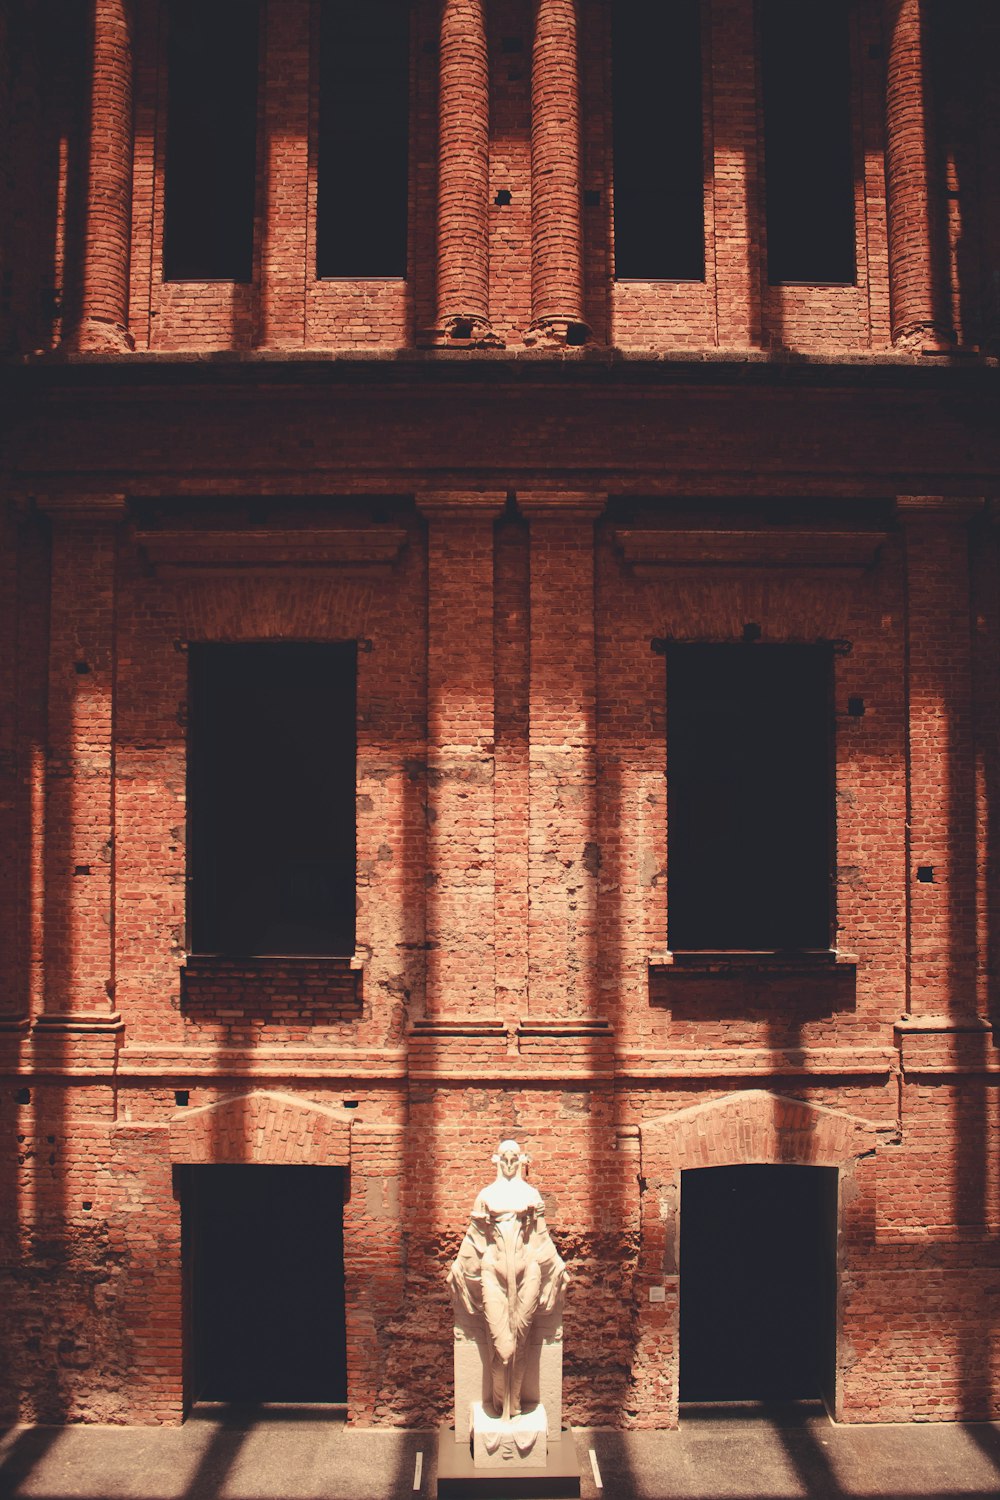 person in white shirt standing in front of brown brick building